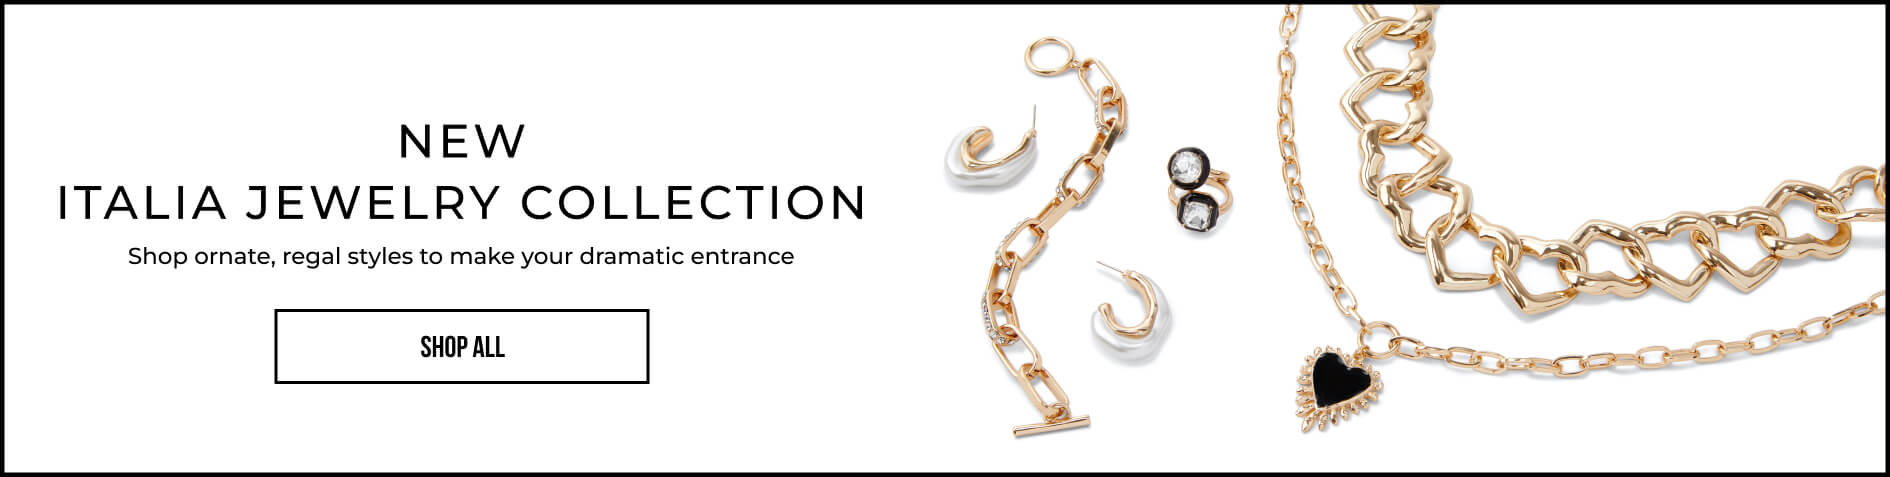 NEW Italia Jewelry Collection - Shop ornate, regal styles to make your dramatic entrance